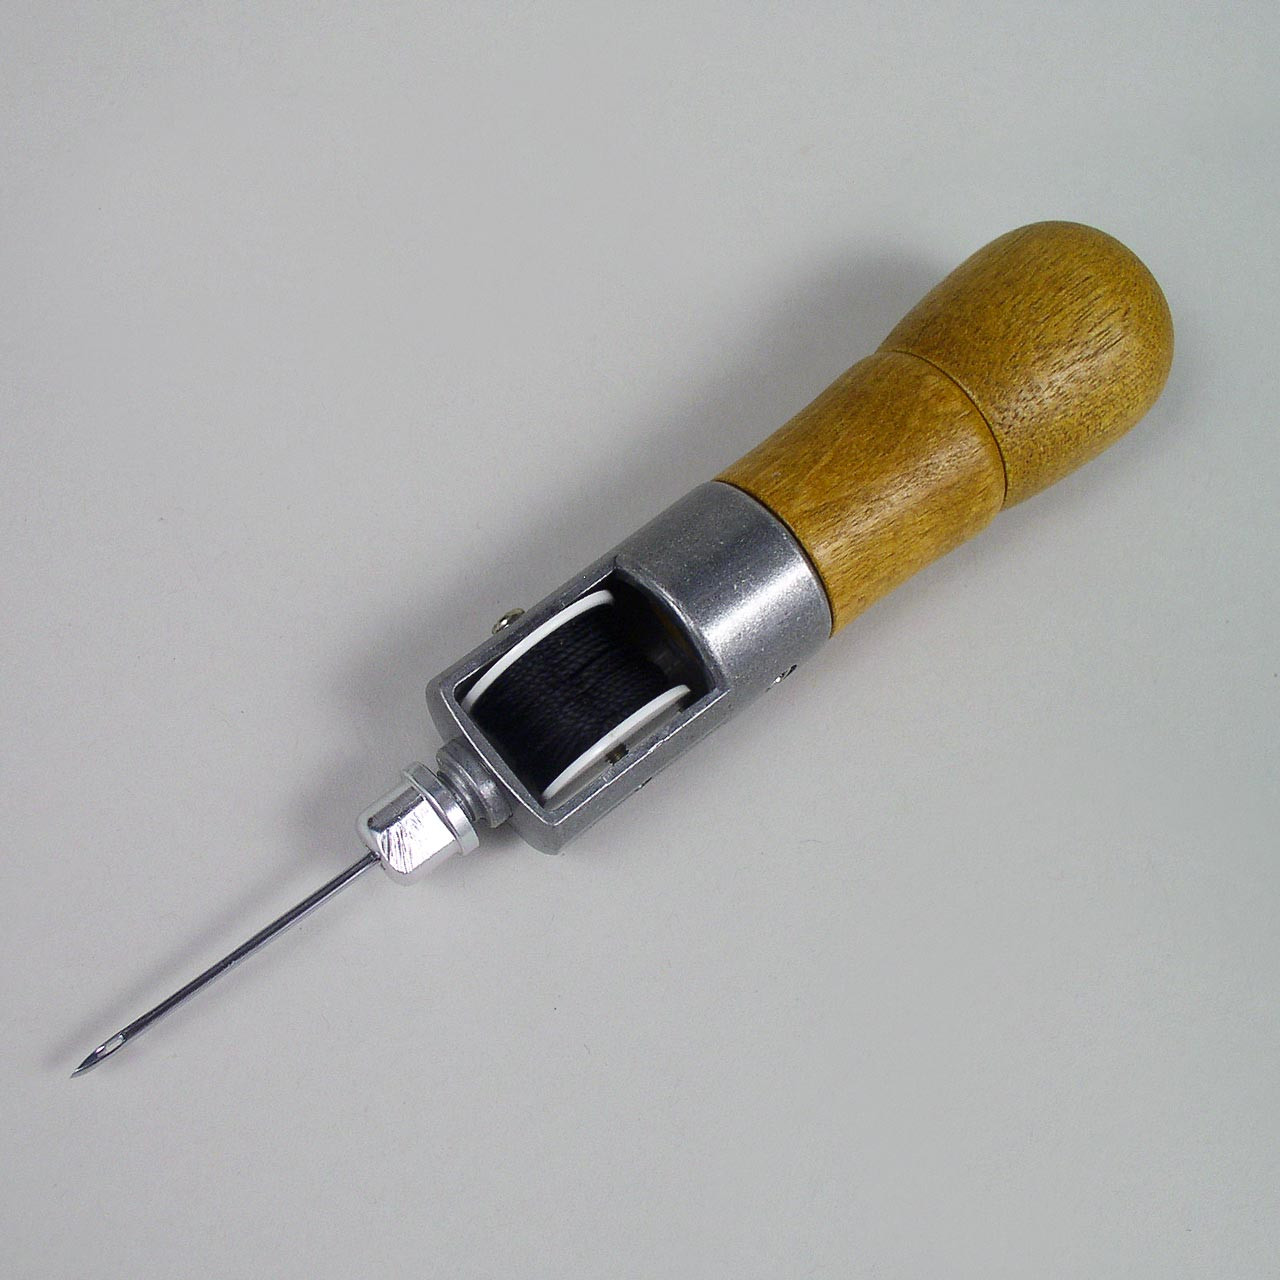 Leather Sewing Awl Kit – Sewing Mends Soul